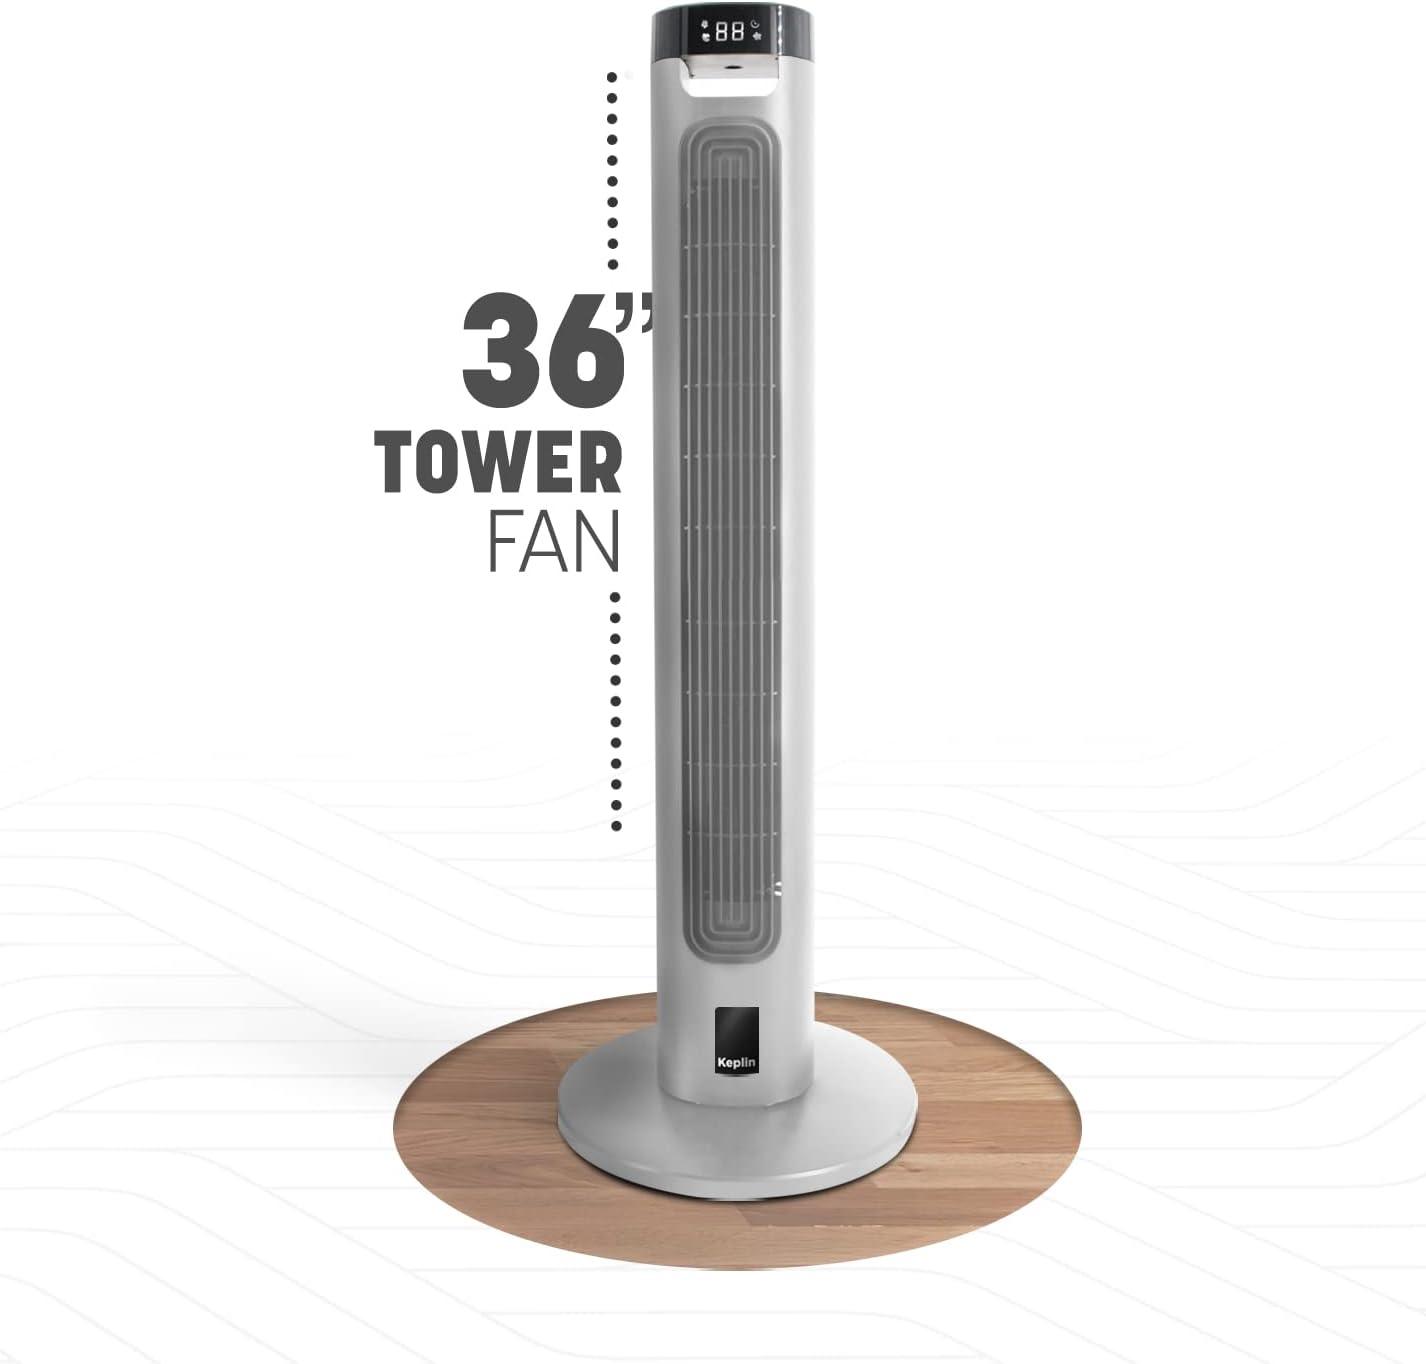 KEPLIN Cooling 36-inch Tall Tower Fan with Remote Control Oscillating - Massive Discounts